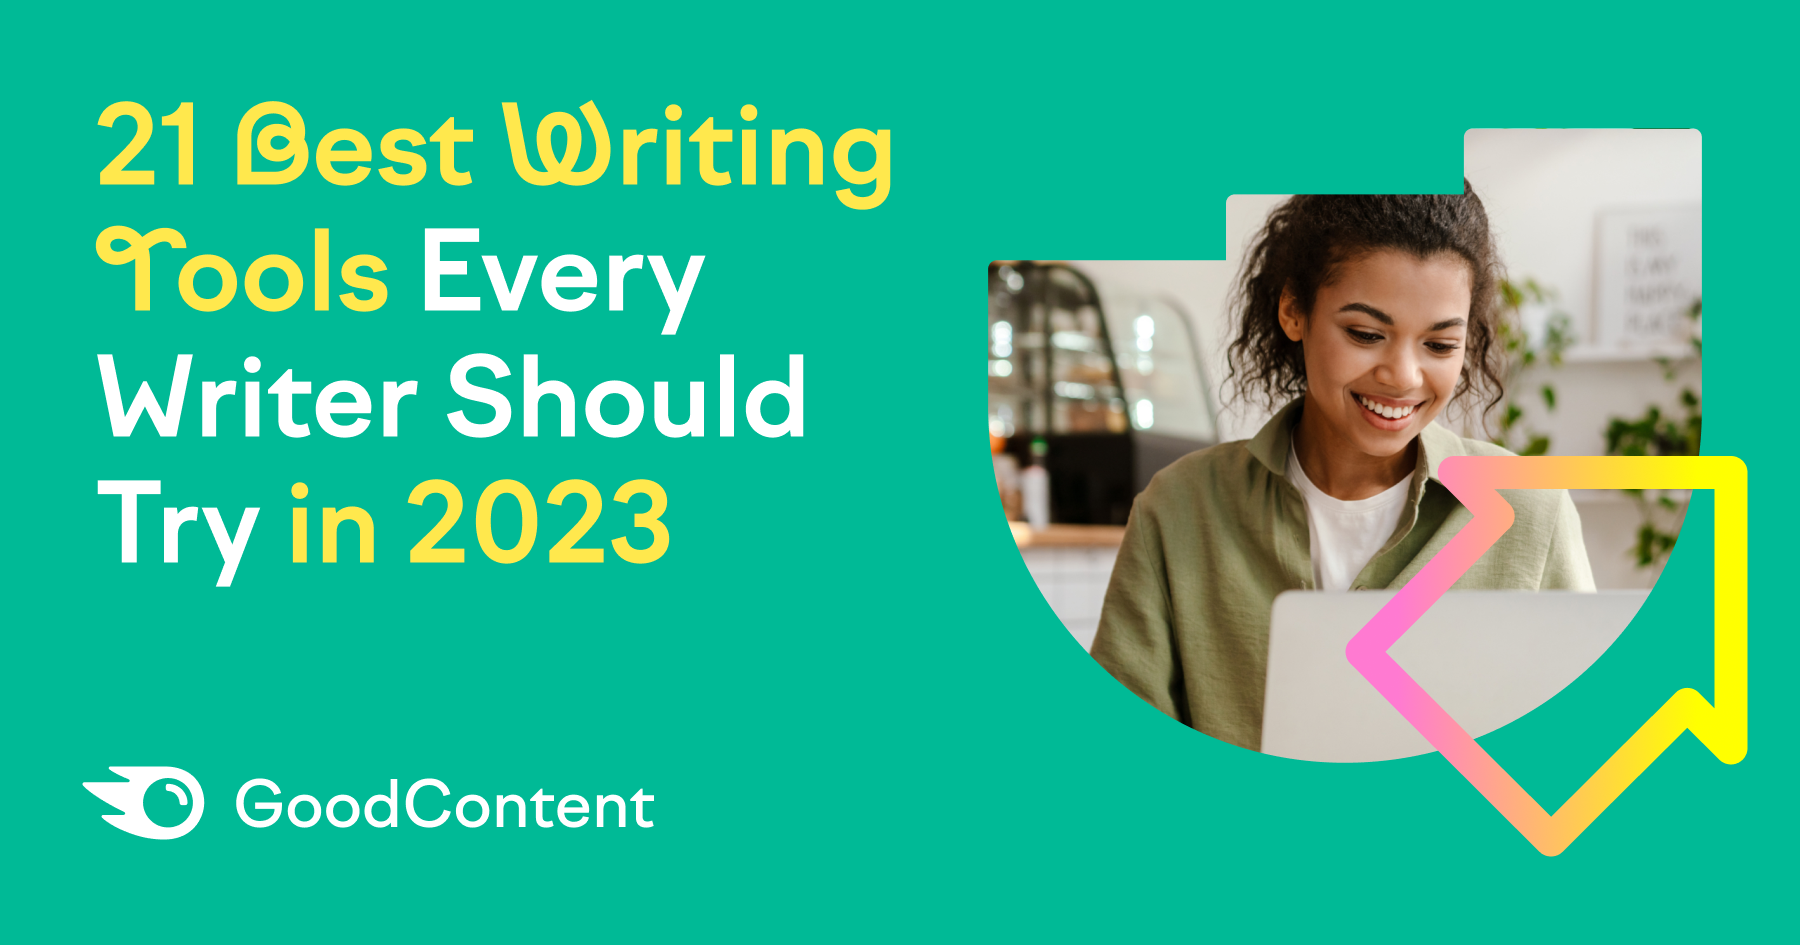 The 10 Best Writing Tools for Every Writer's Needs in 2023